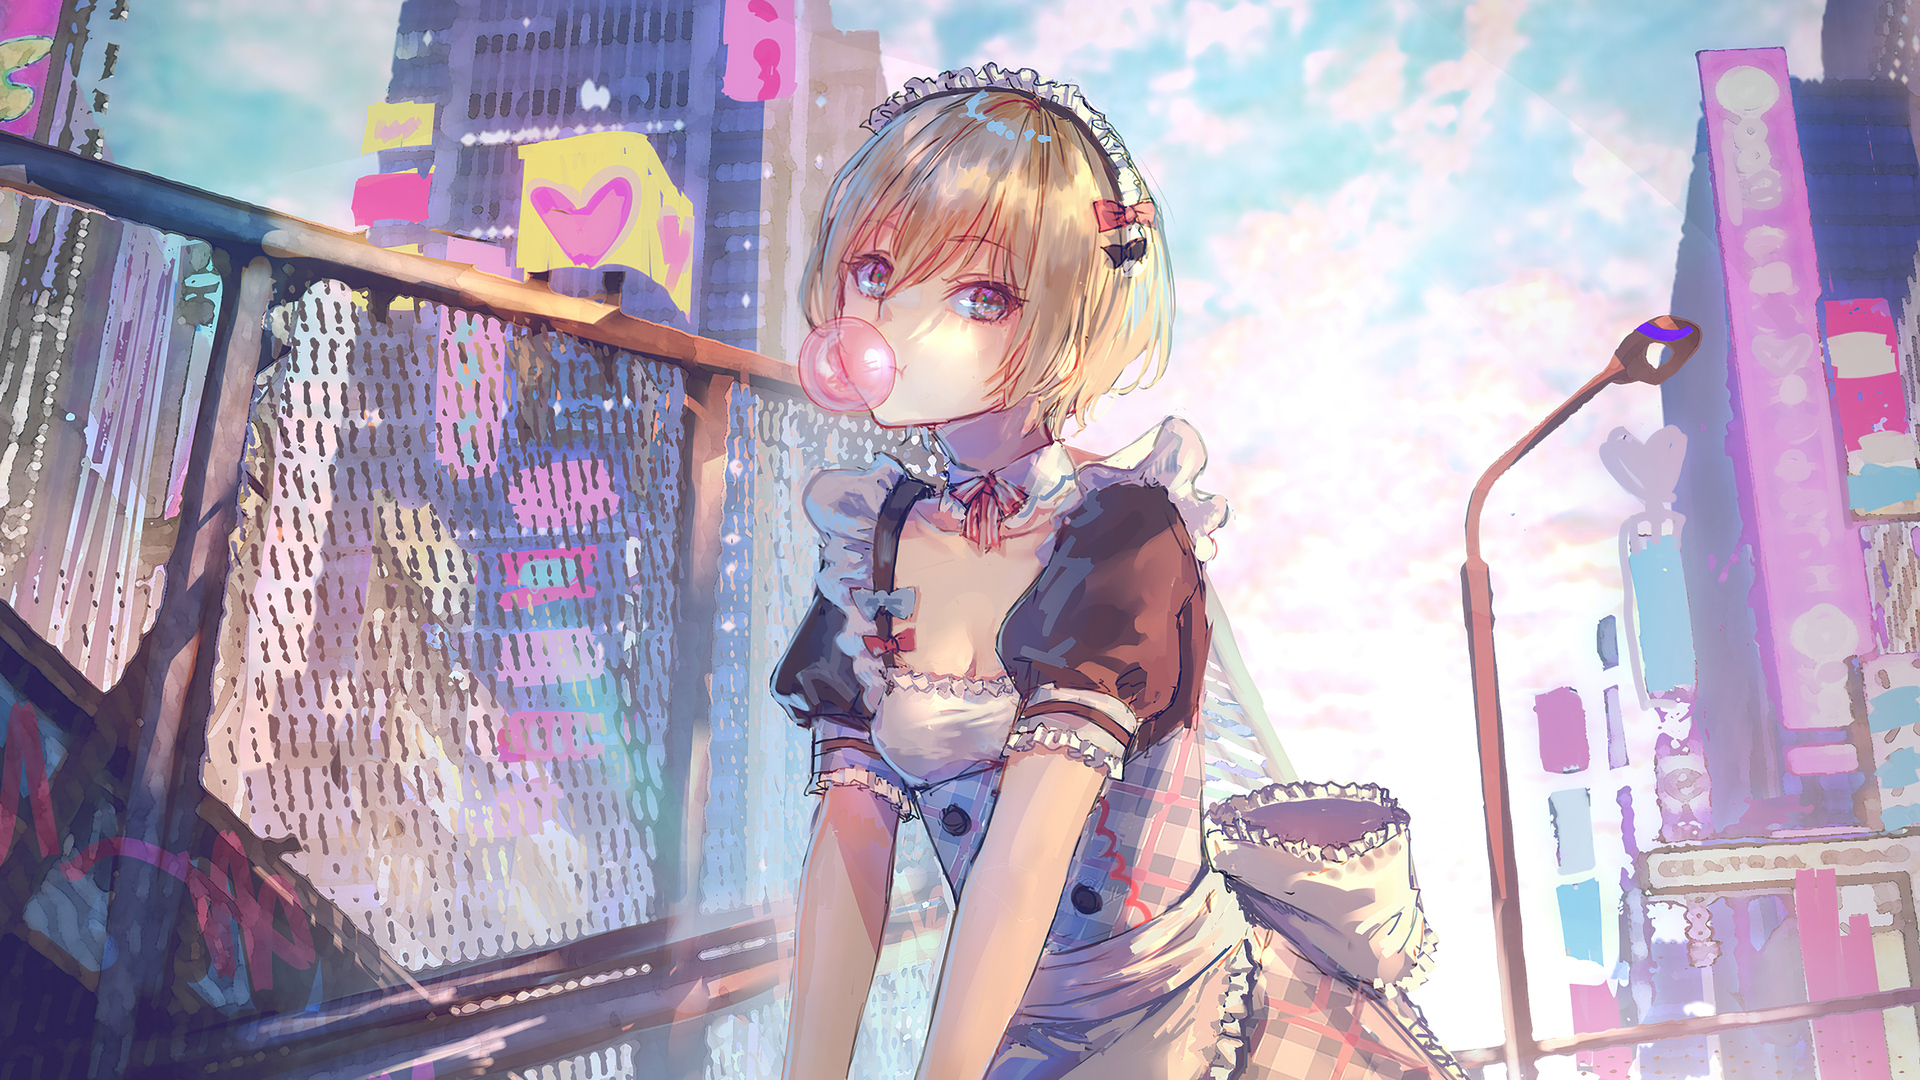 Anime Girls Blonde Short Hair Maid Outfit Maid Building City Looking At Viewer Clouds Low Angle Chew 1920x1080